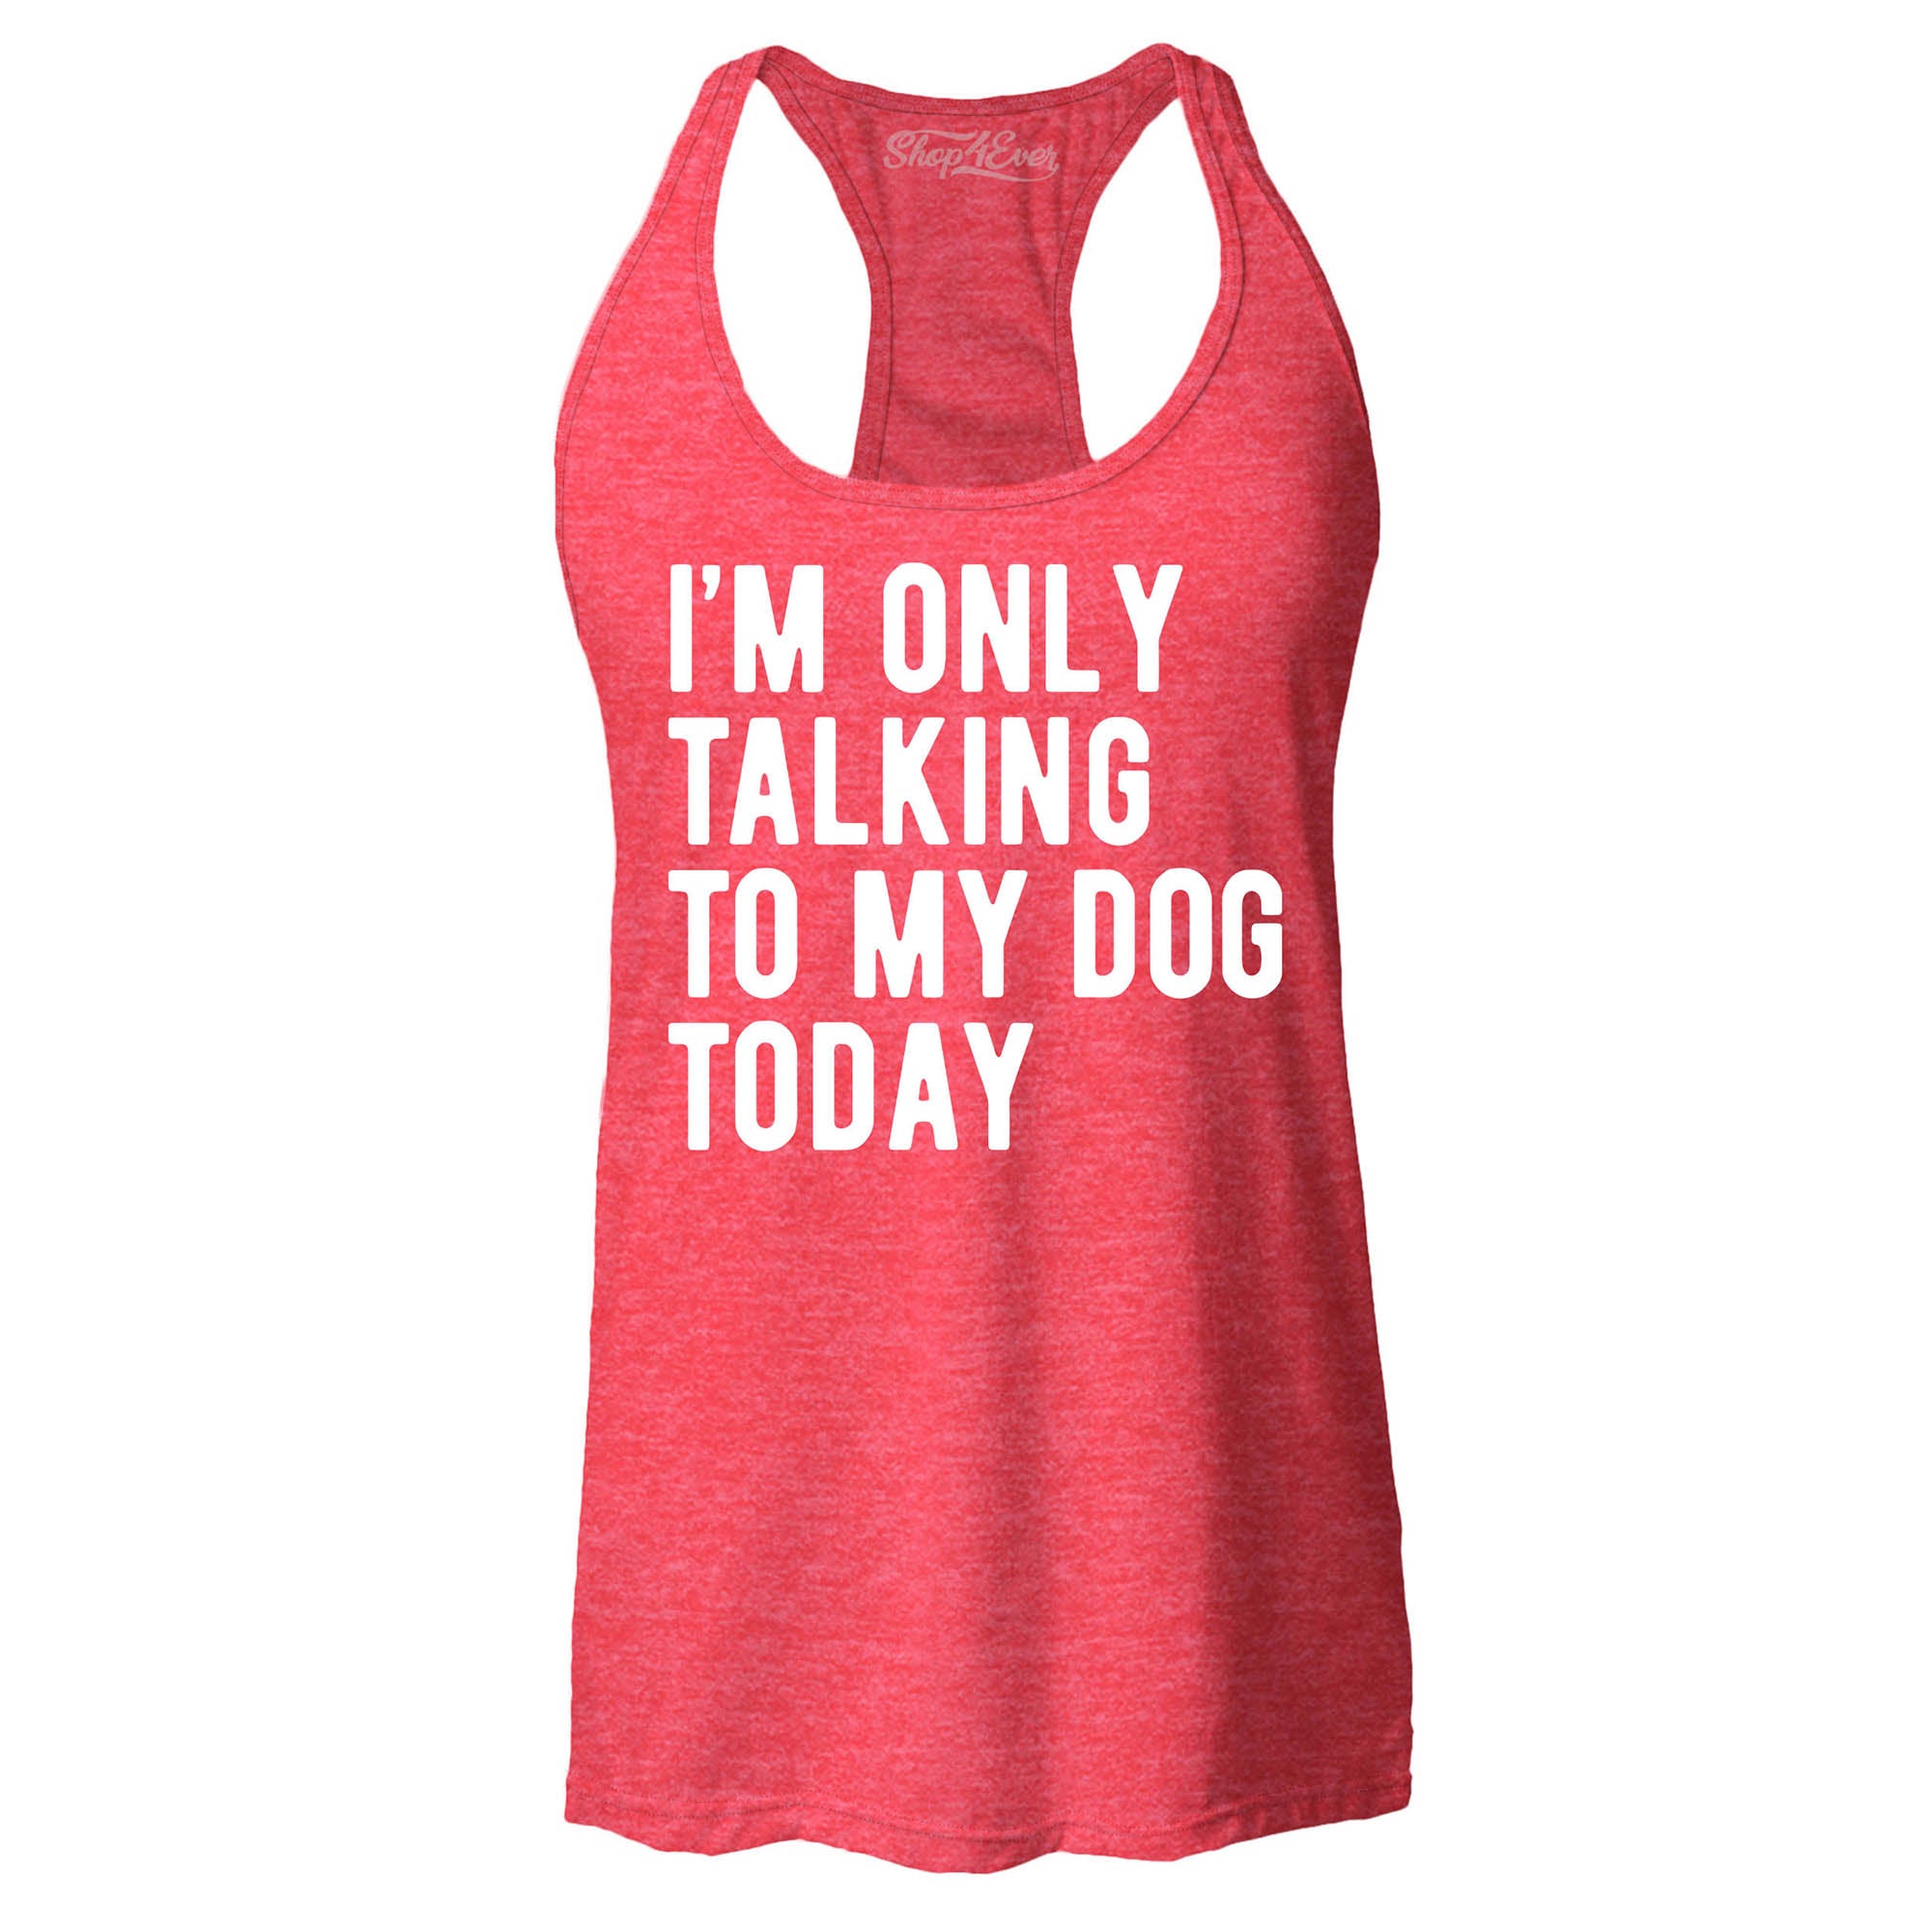 I'm Only Talking to My Dog Today Women's Racerback Tank Top Slim Fit